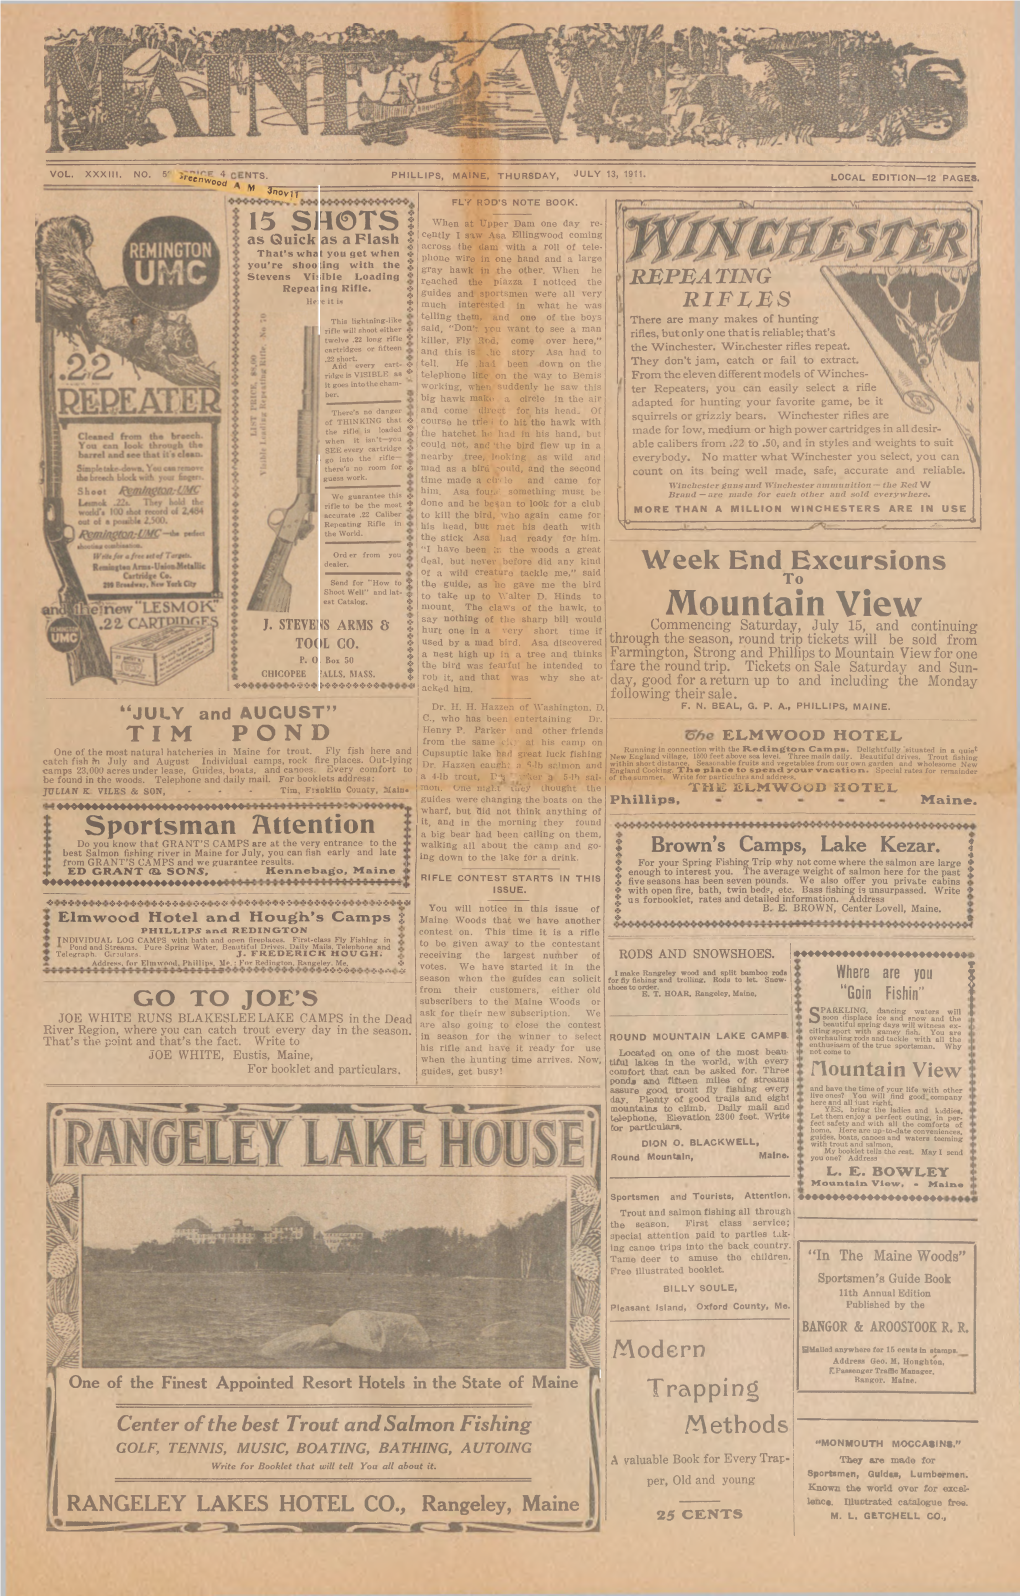 Maine Woods : Vol. 33, No. 50 July 13,1911 (Local Edition)